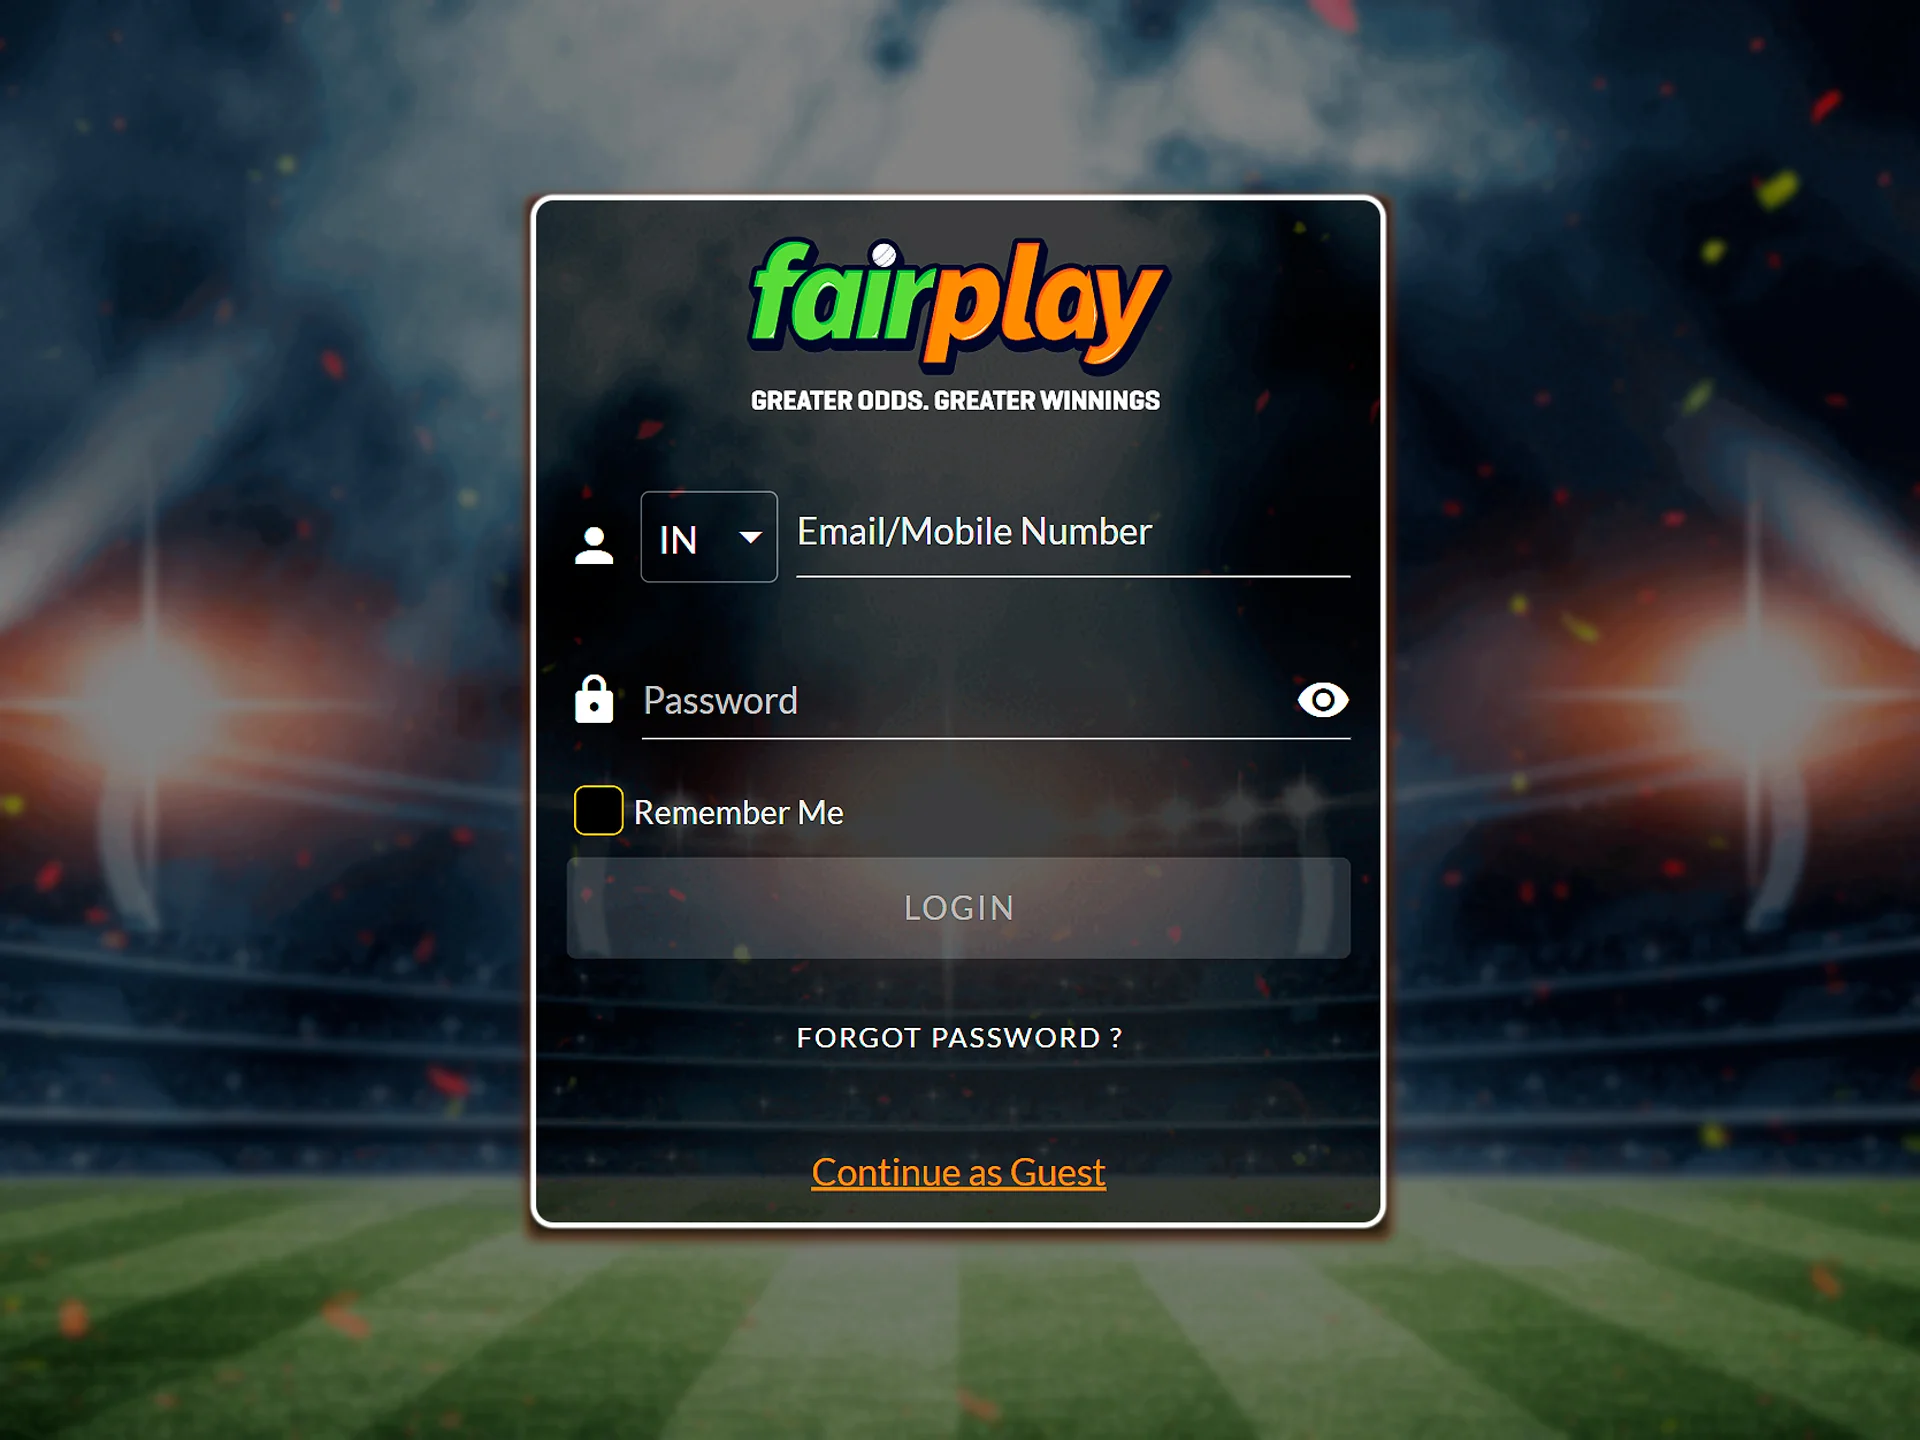 Log in to your Fairplay account using the username and password you came up with when you registered.